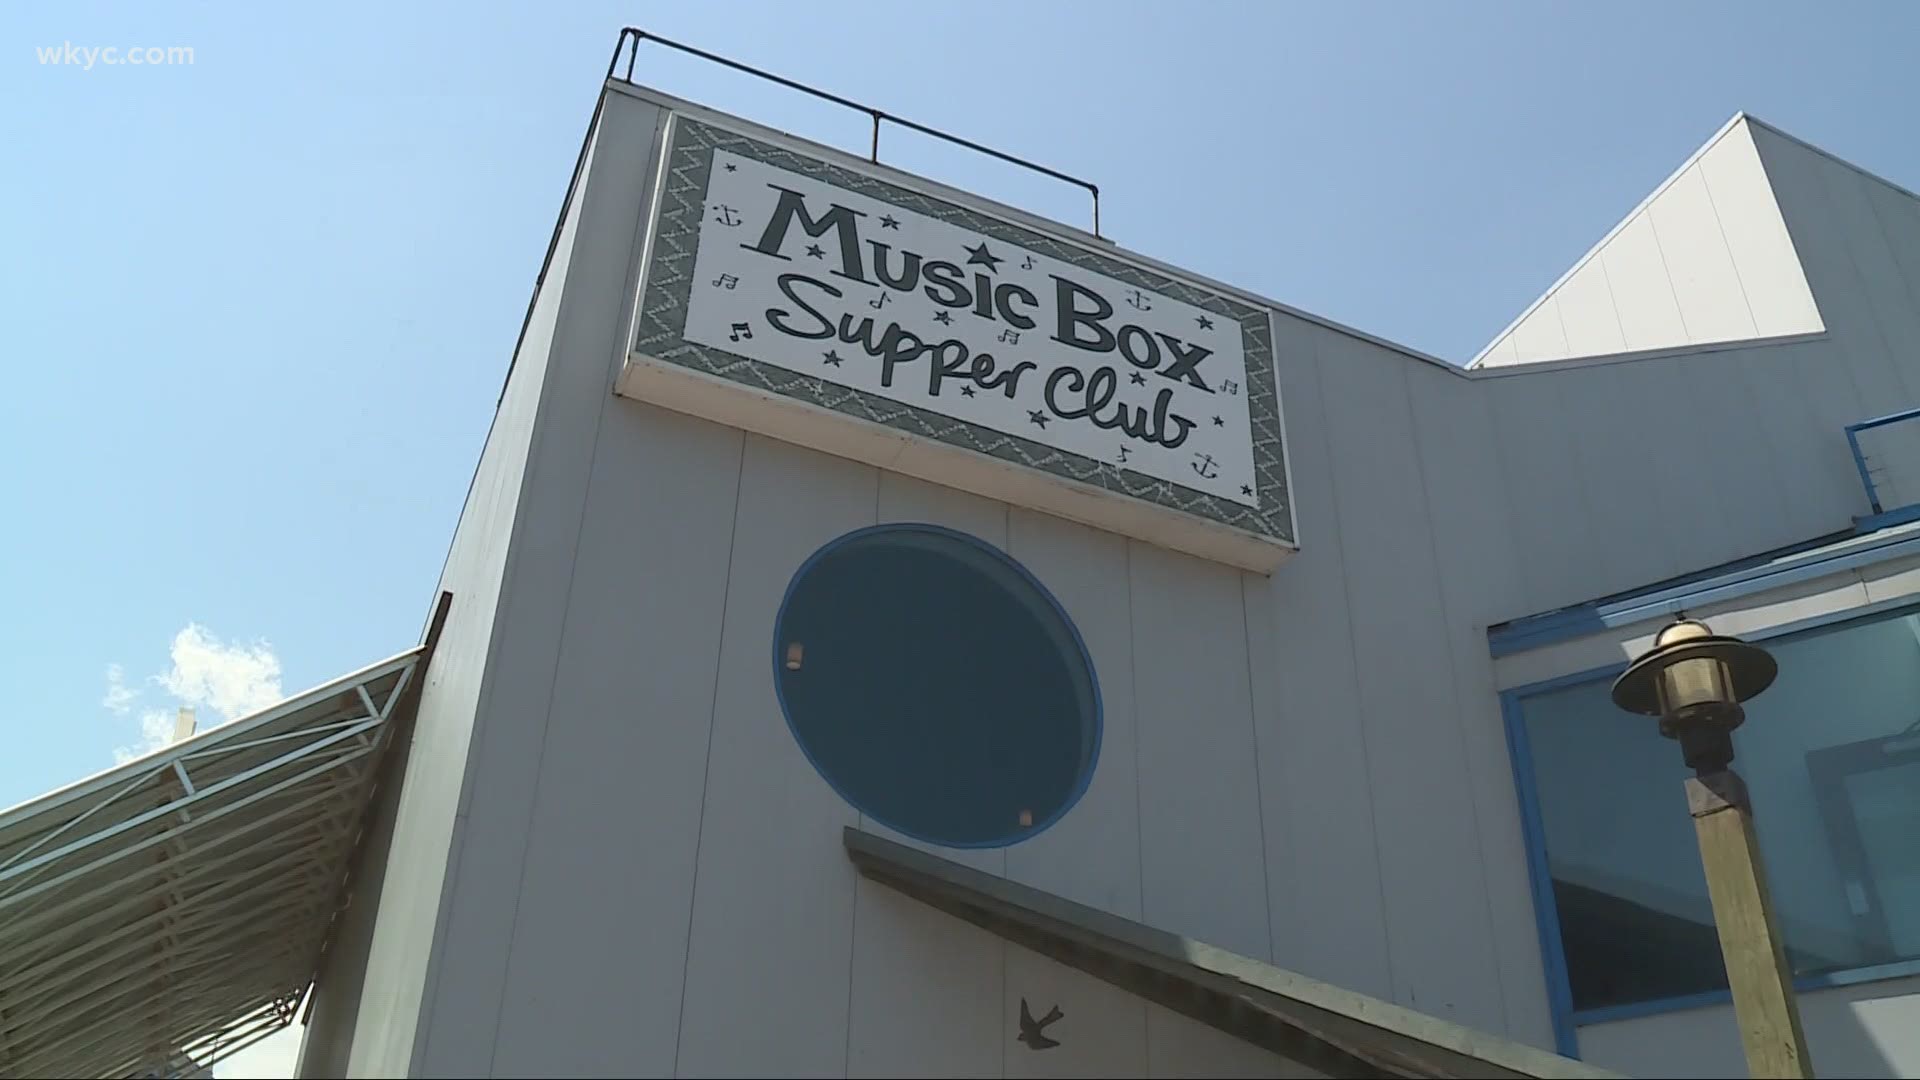 One part of nightlife that has been slow to come back is live music. However, one club in the flats is getting set to change that. Mark Naymik reports.